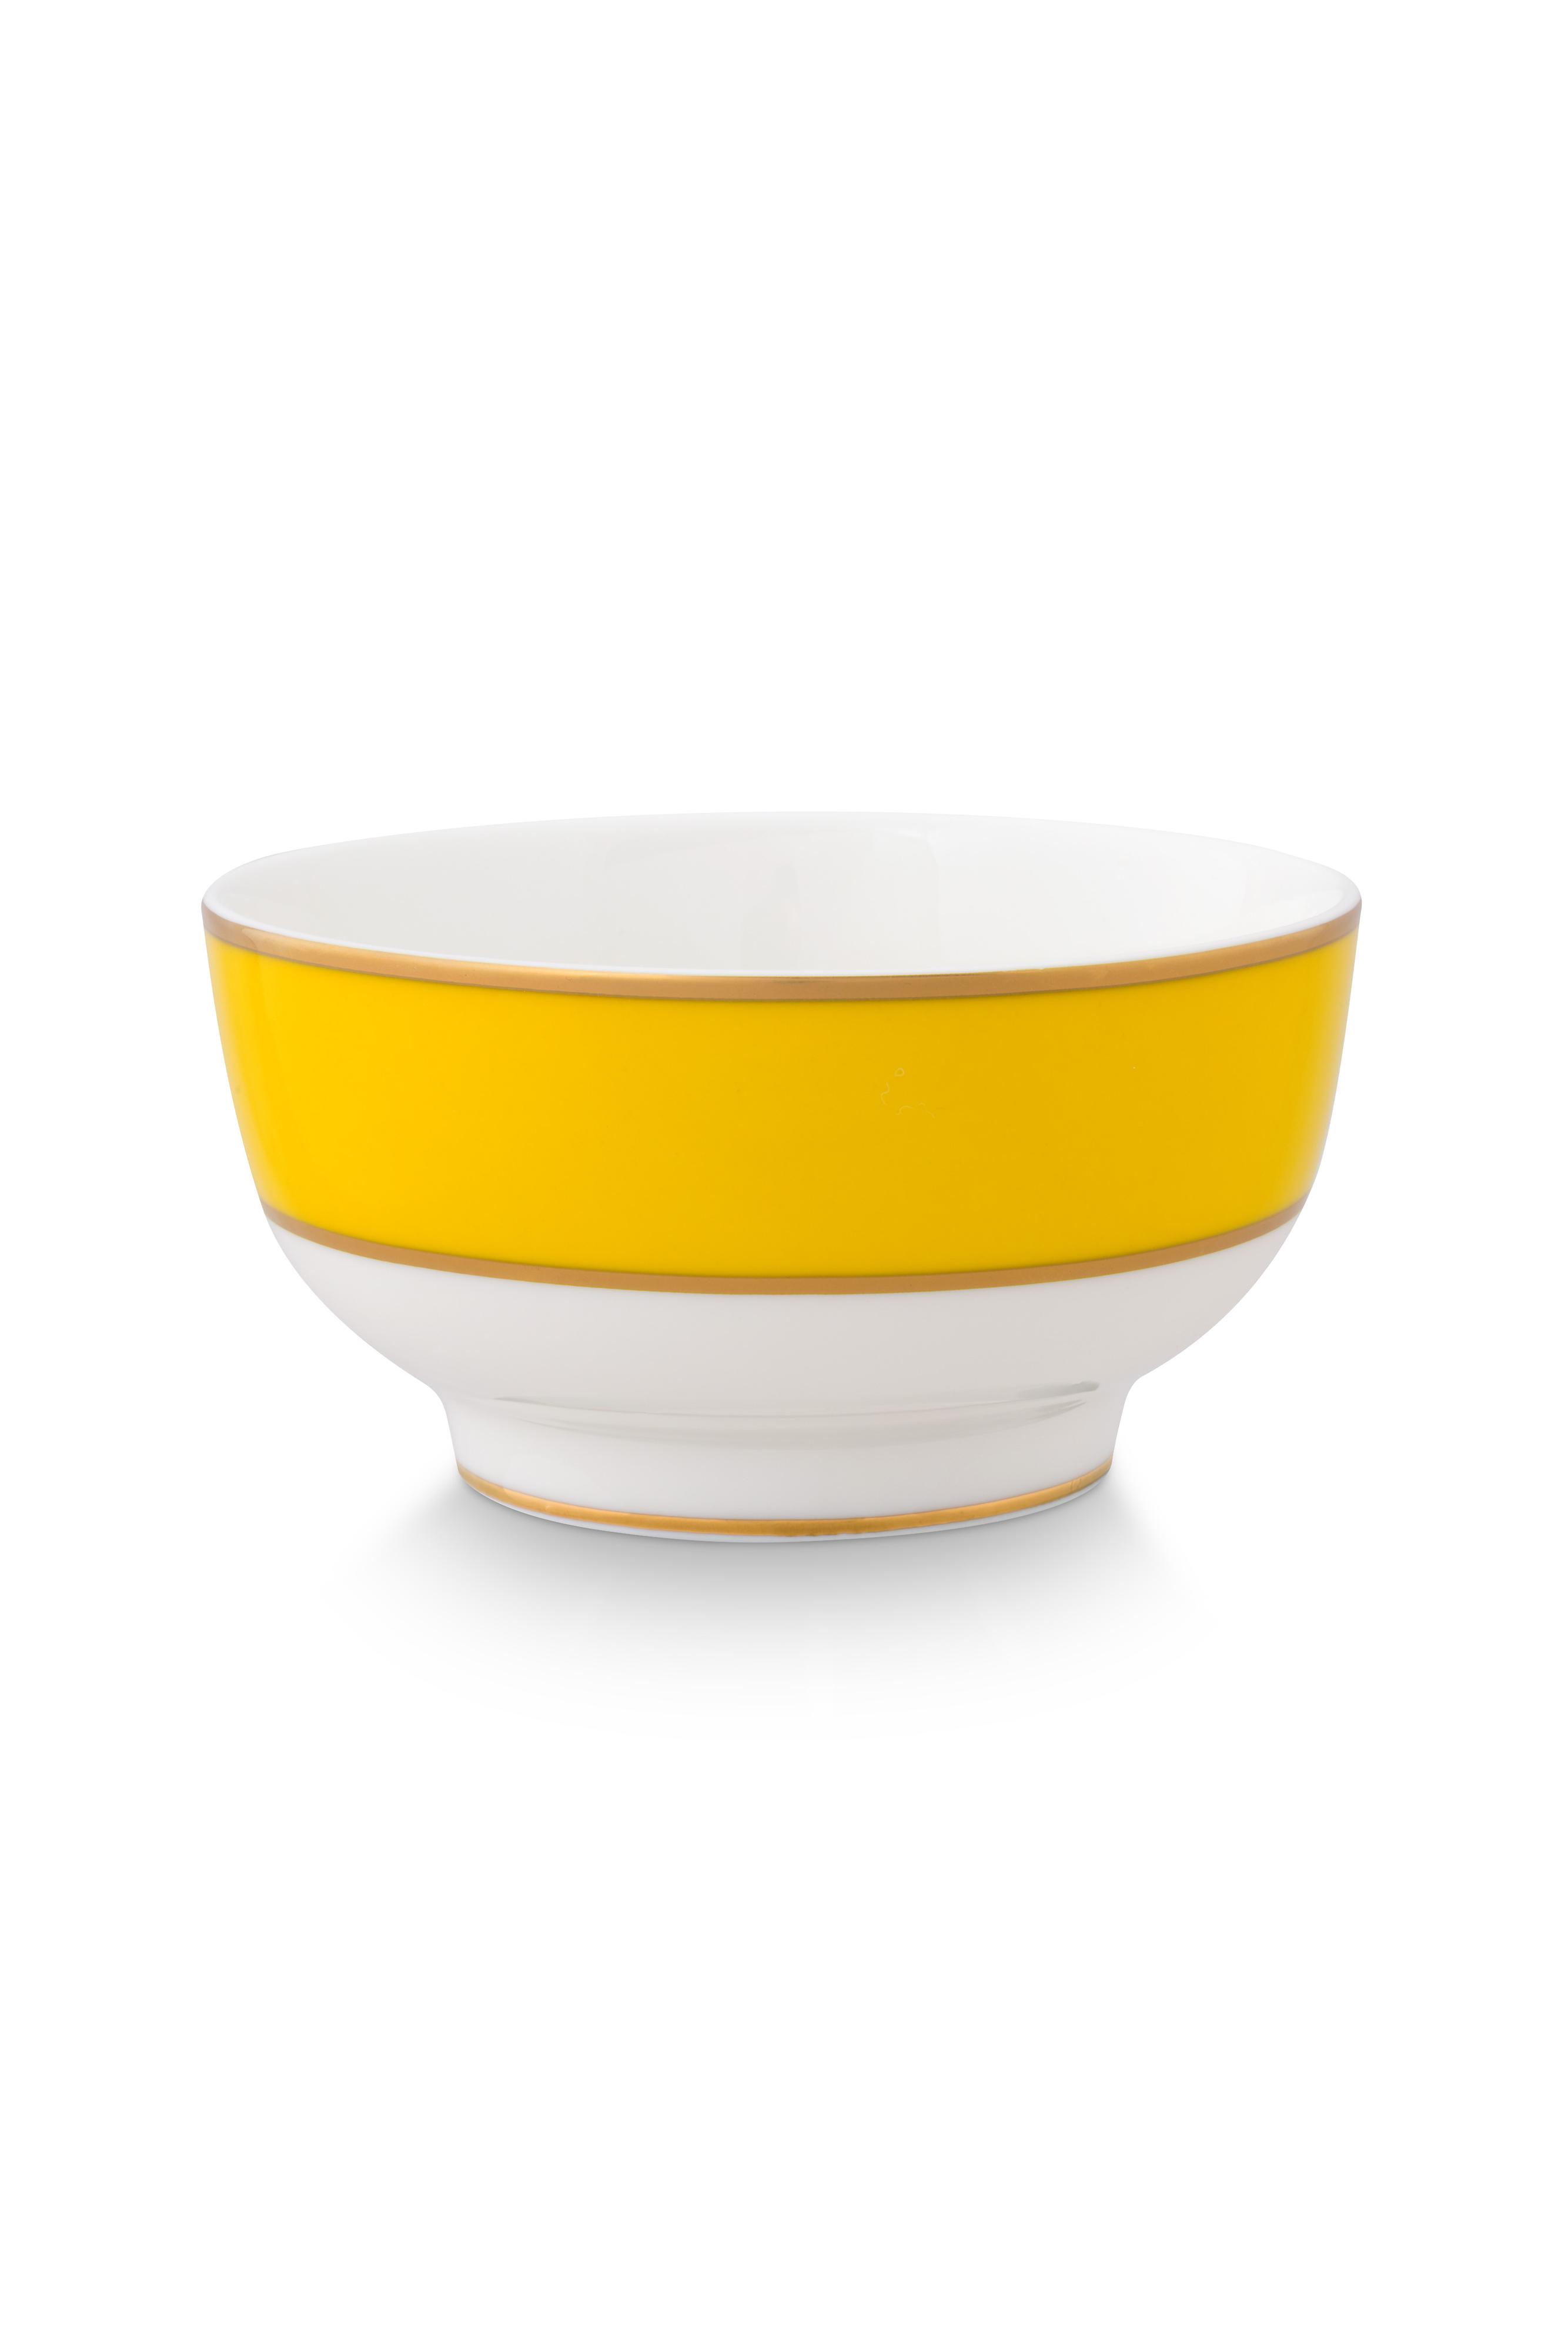 Bowl Pip Chique Gold-yellow 12.5cm Gift